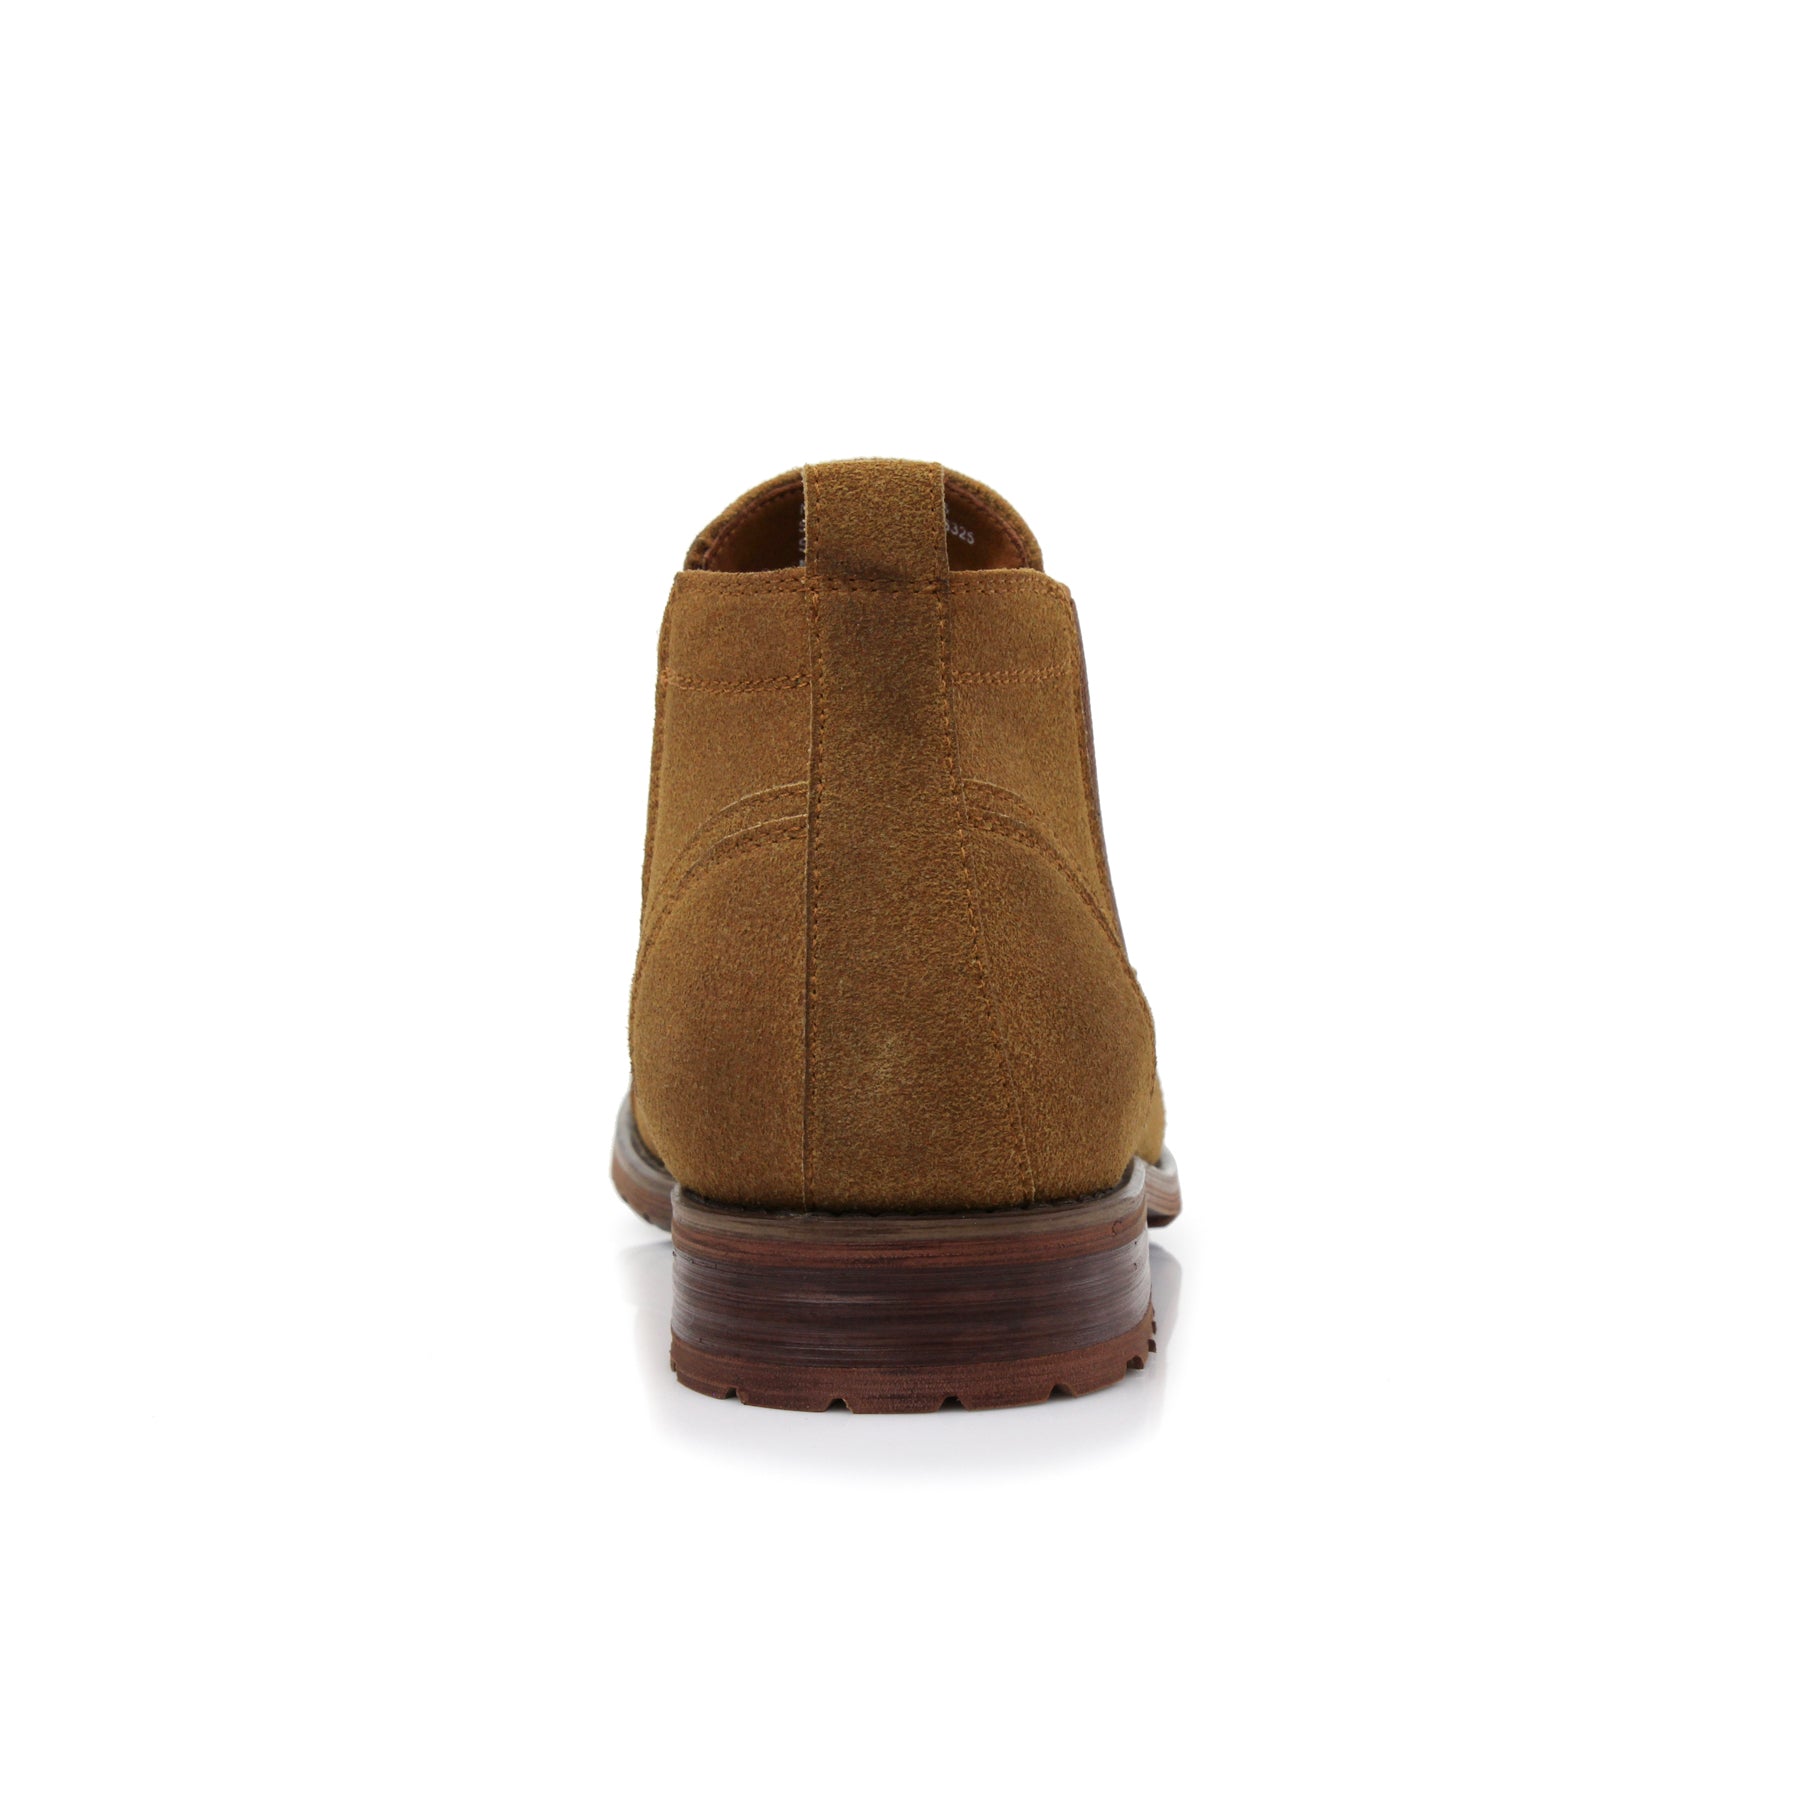 Suede Chelsea Boots | Sterling by Ferro Aldo | Conal Footwear | Back Angle View